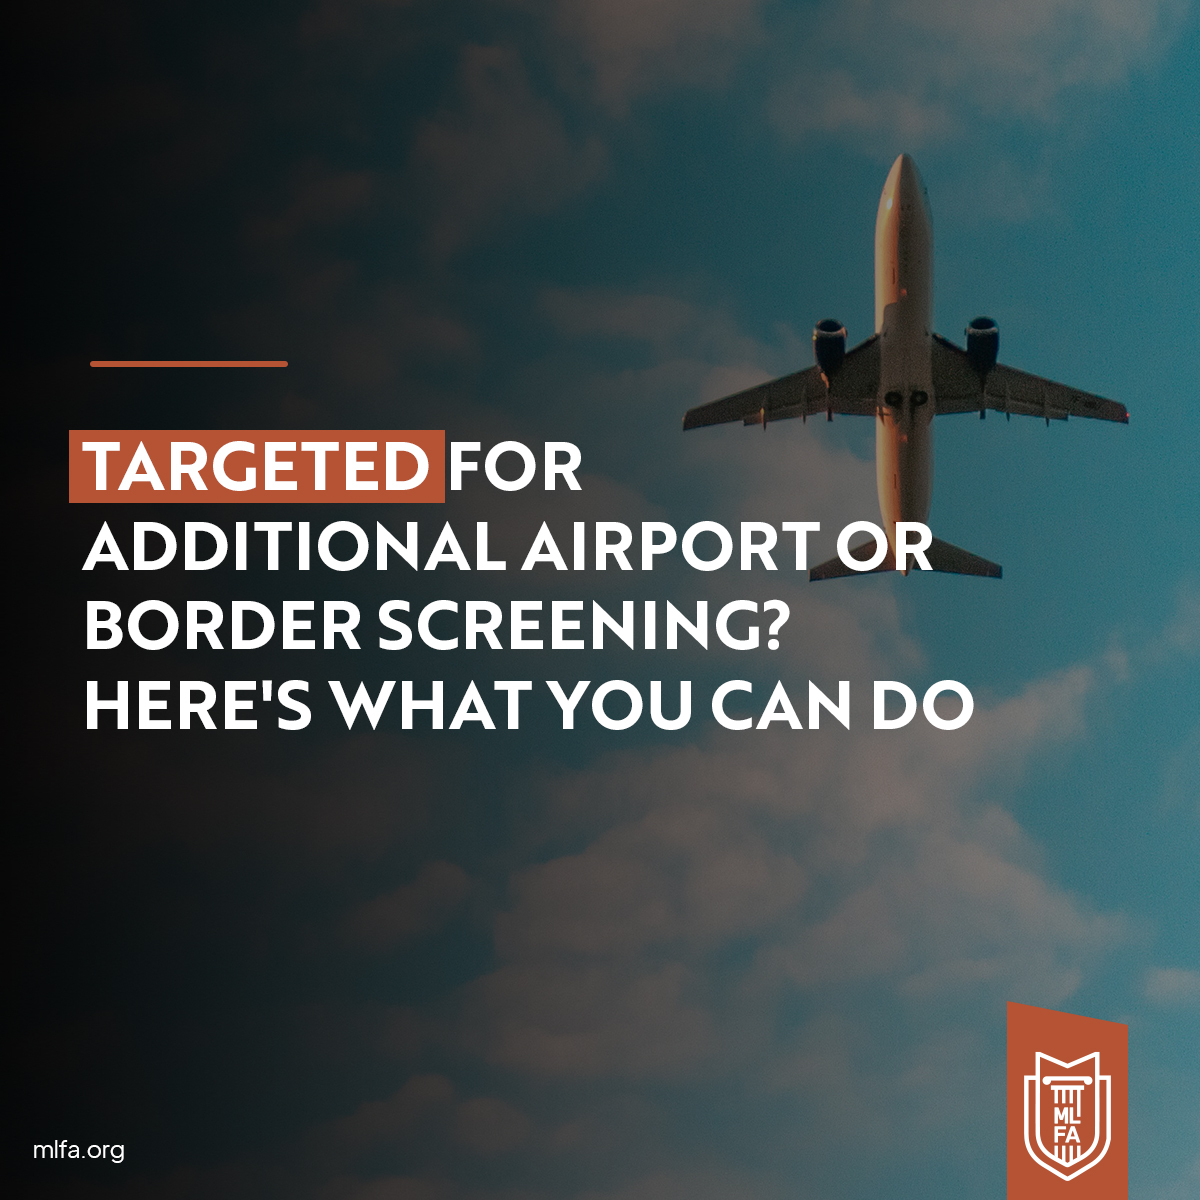 Targeted for Additional Airport or Border Screening? Here’s What You Can Do